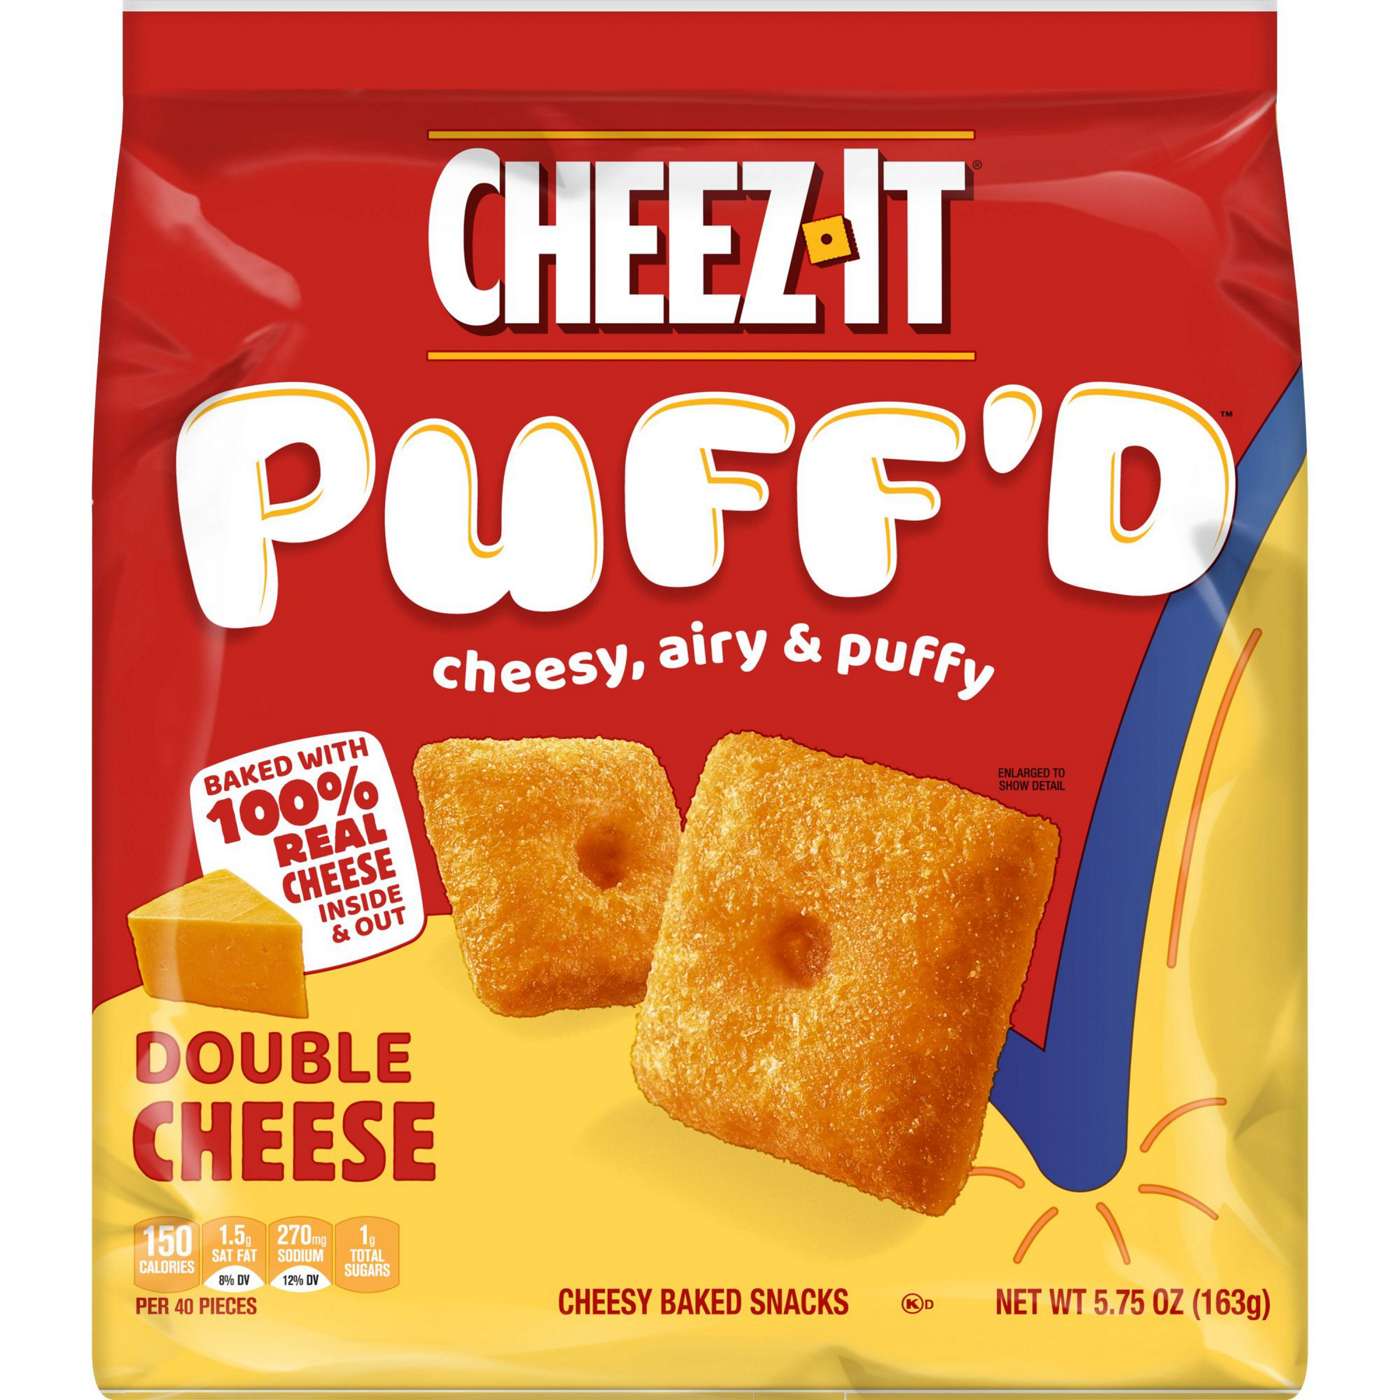 Cheez-It Puff'd Double Cheese Cheesy Baked Snacks; image 1 of 5